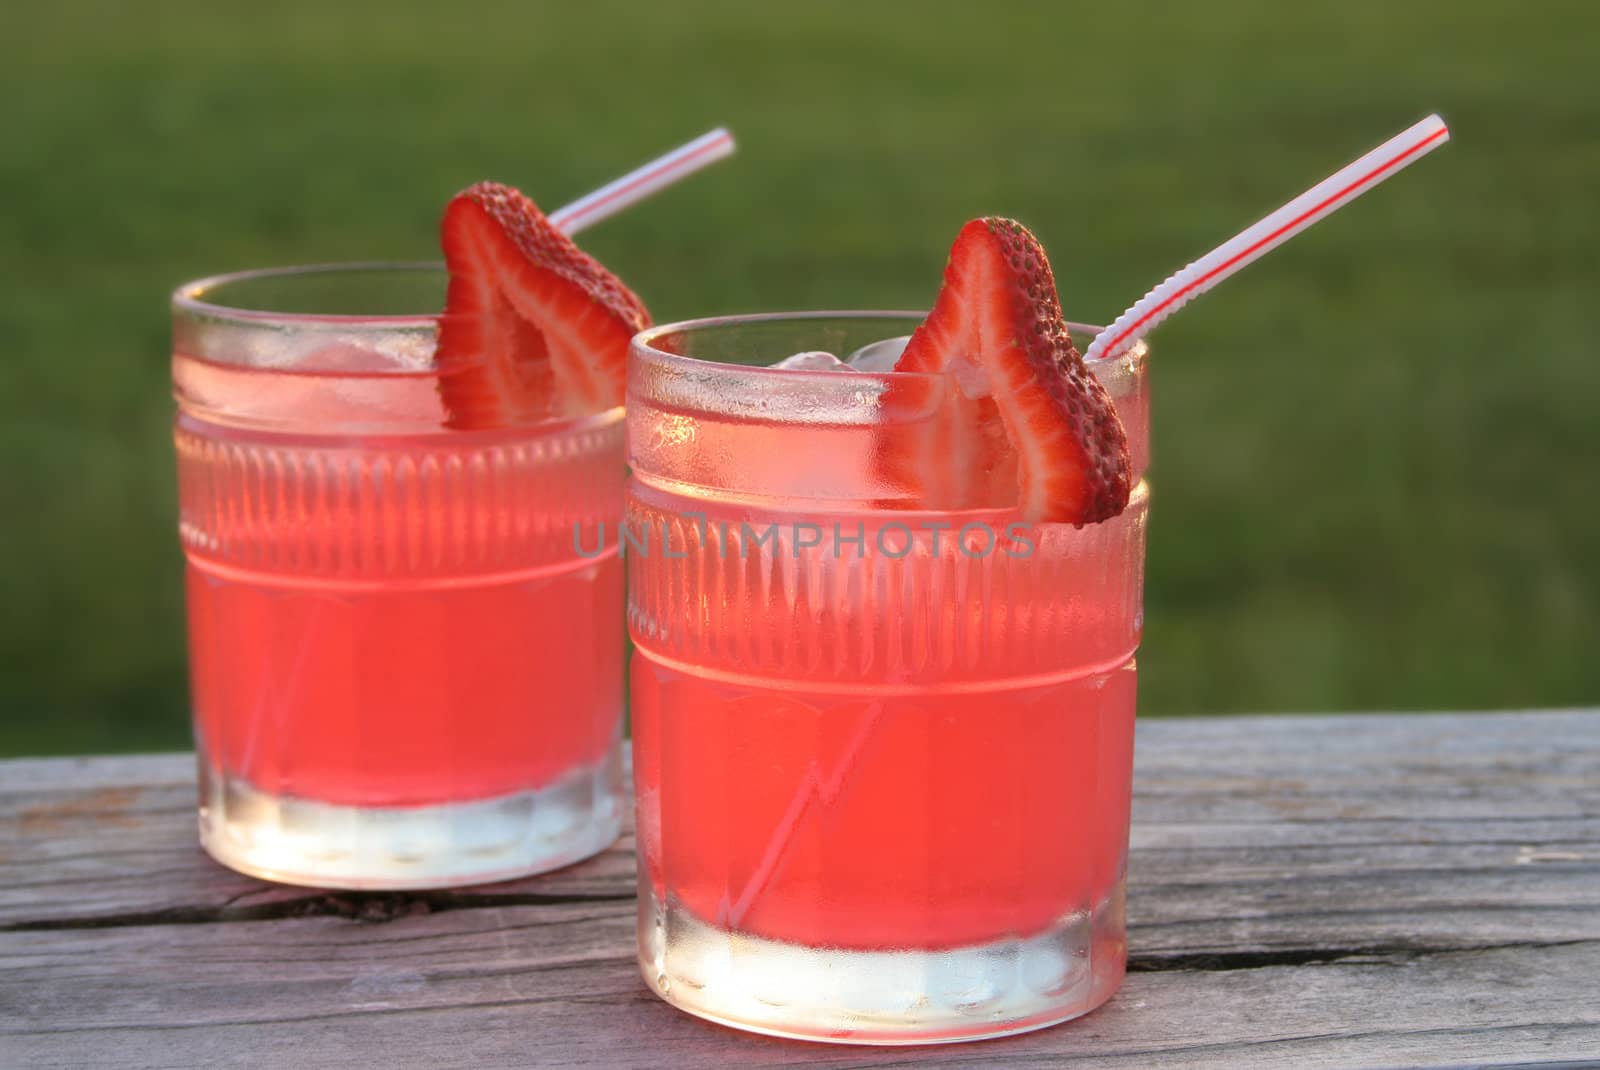 two glasses of ice cold pink lemonade/or strawberry cocktail garnised with fresh sliced strawberries.